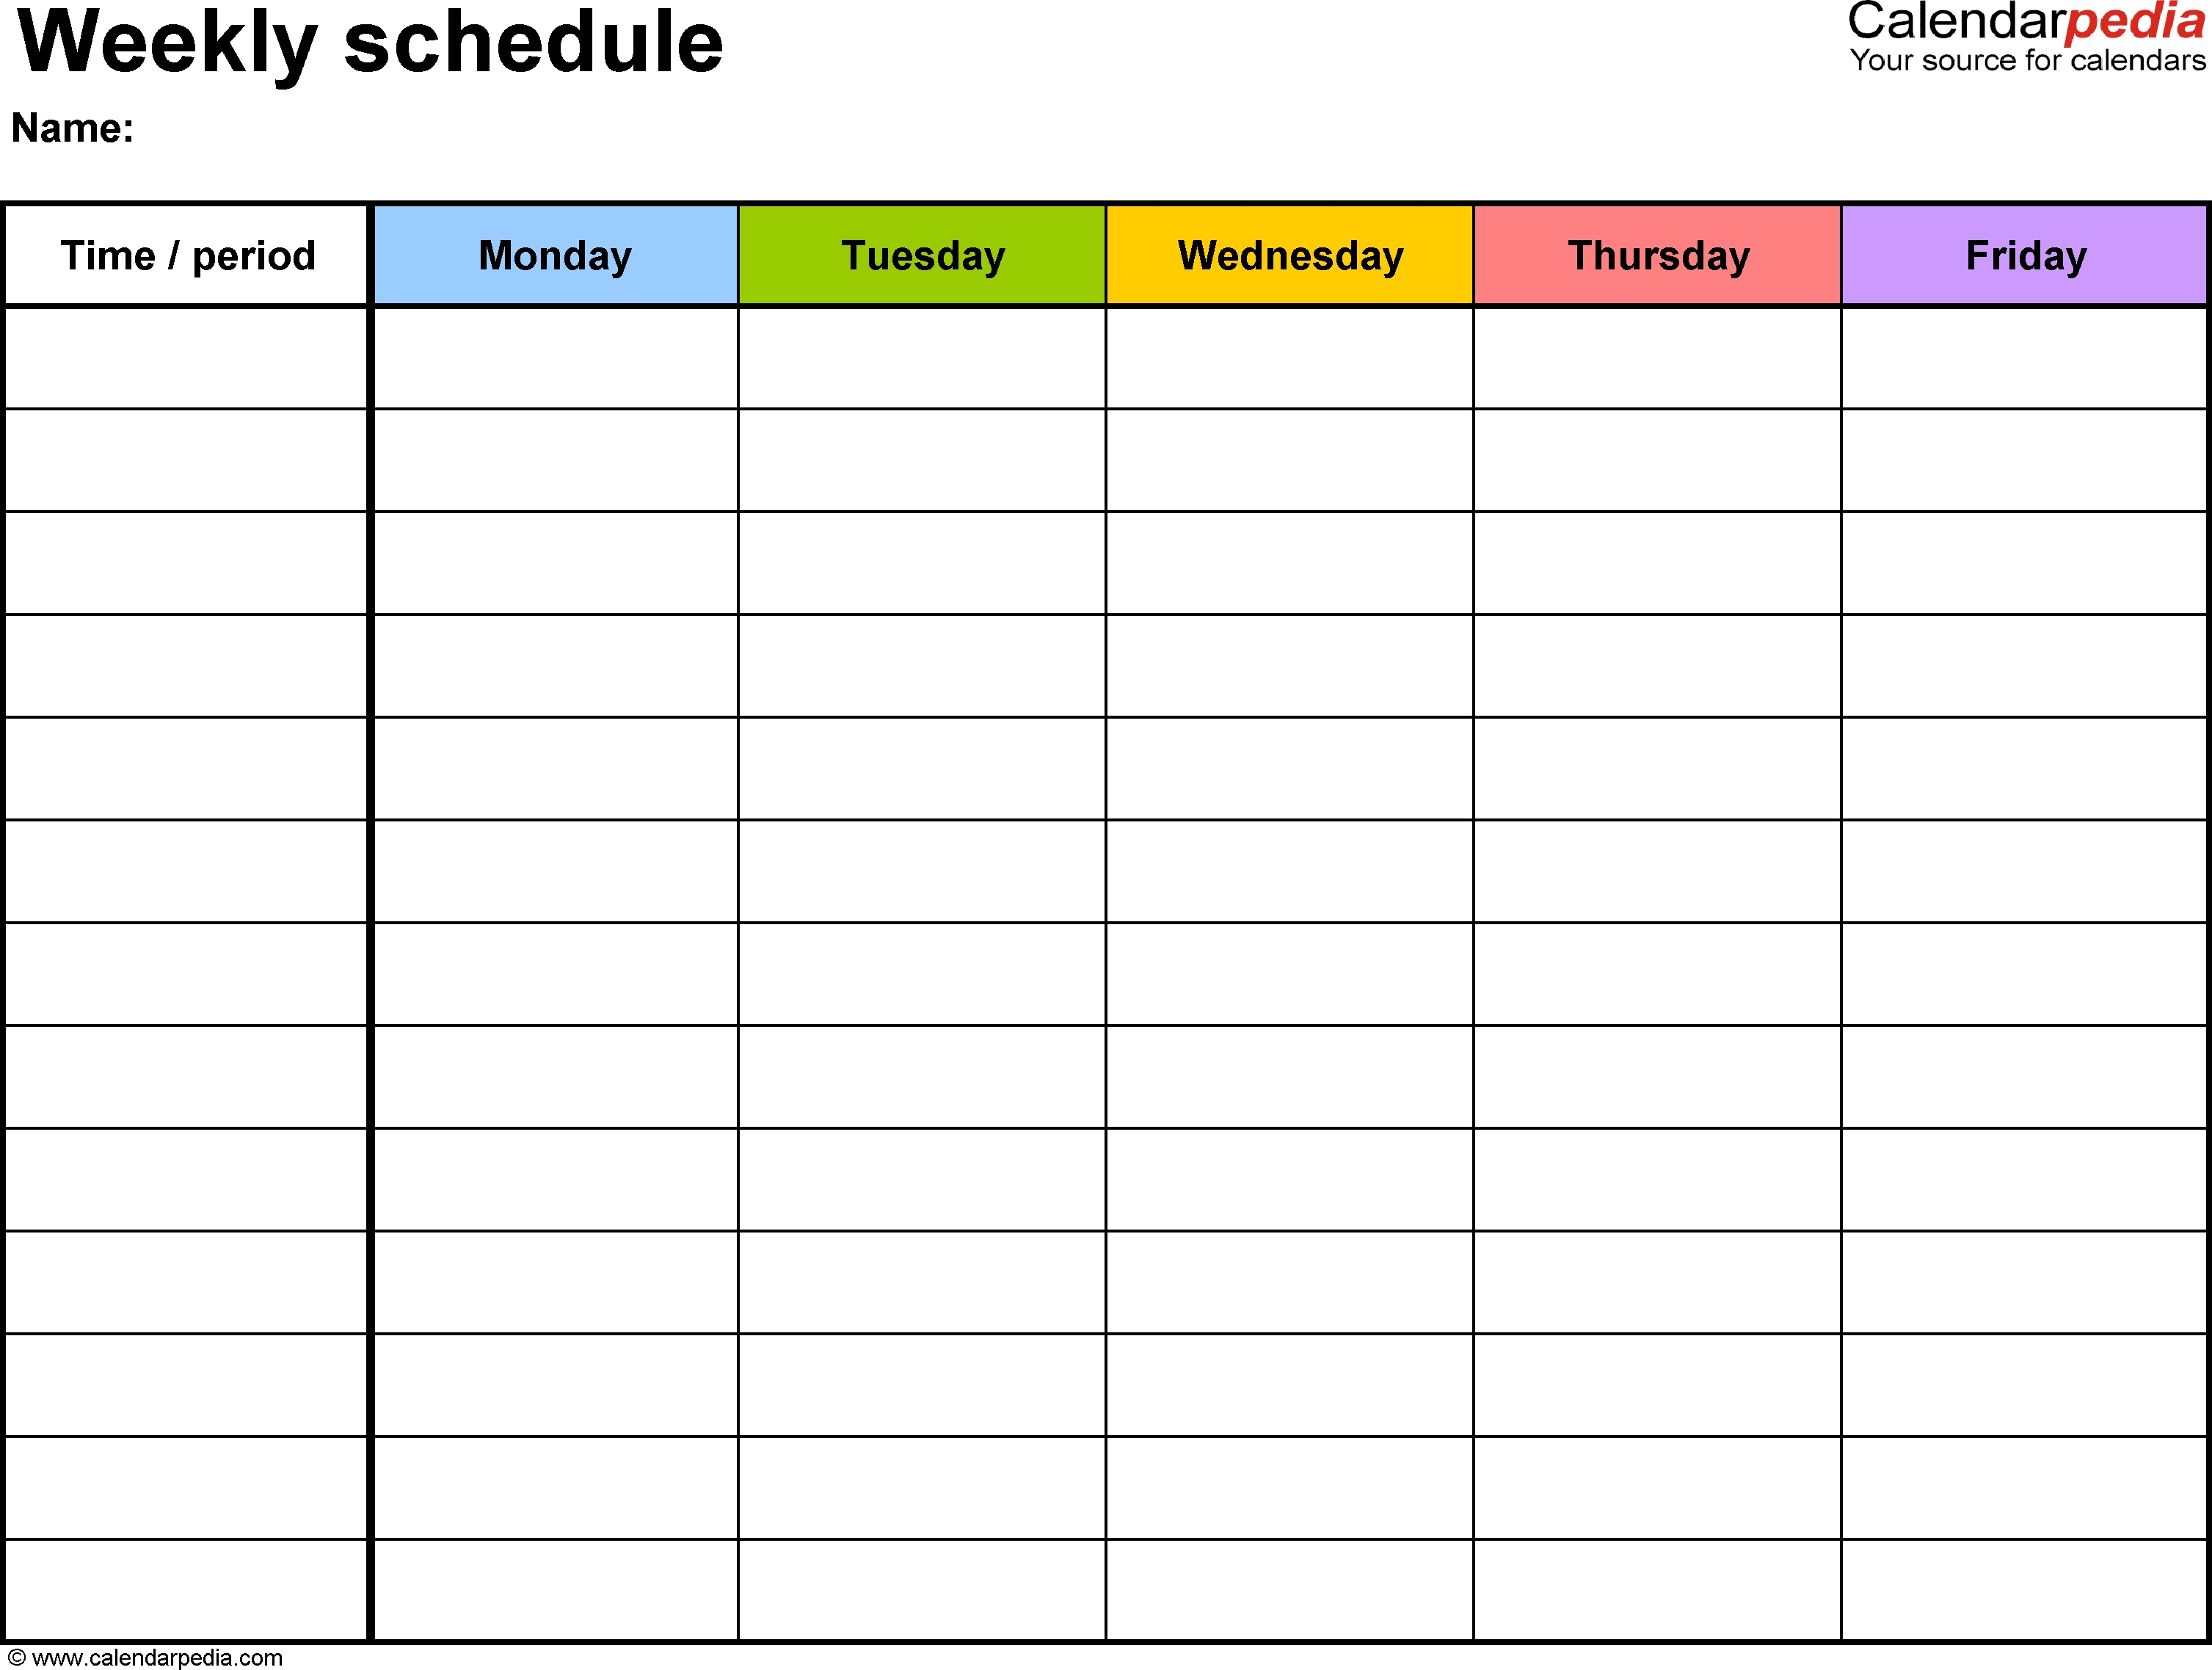 Free Weekly Schedule Templates For Excel - 18 Templates-Images Of Free Printable Calendar Templates For Kids Monday To Friday Only